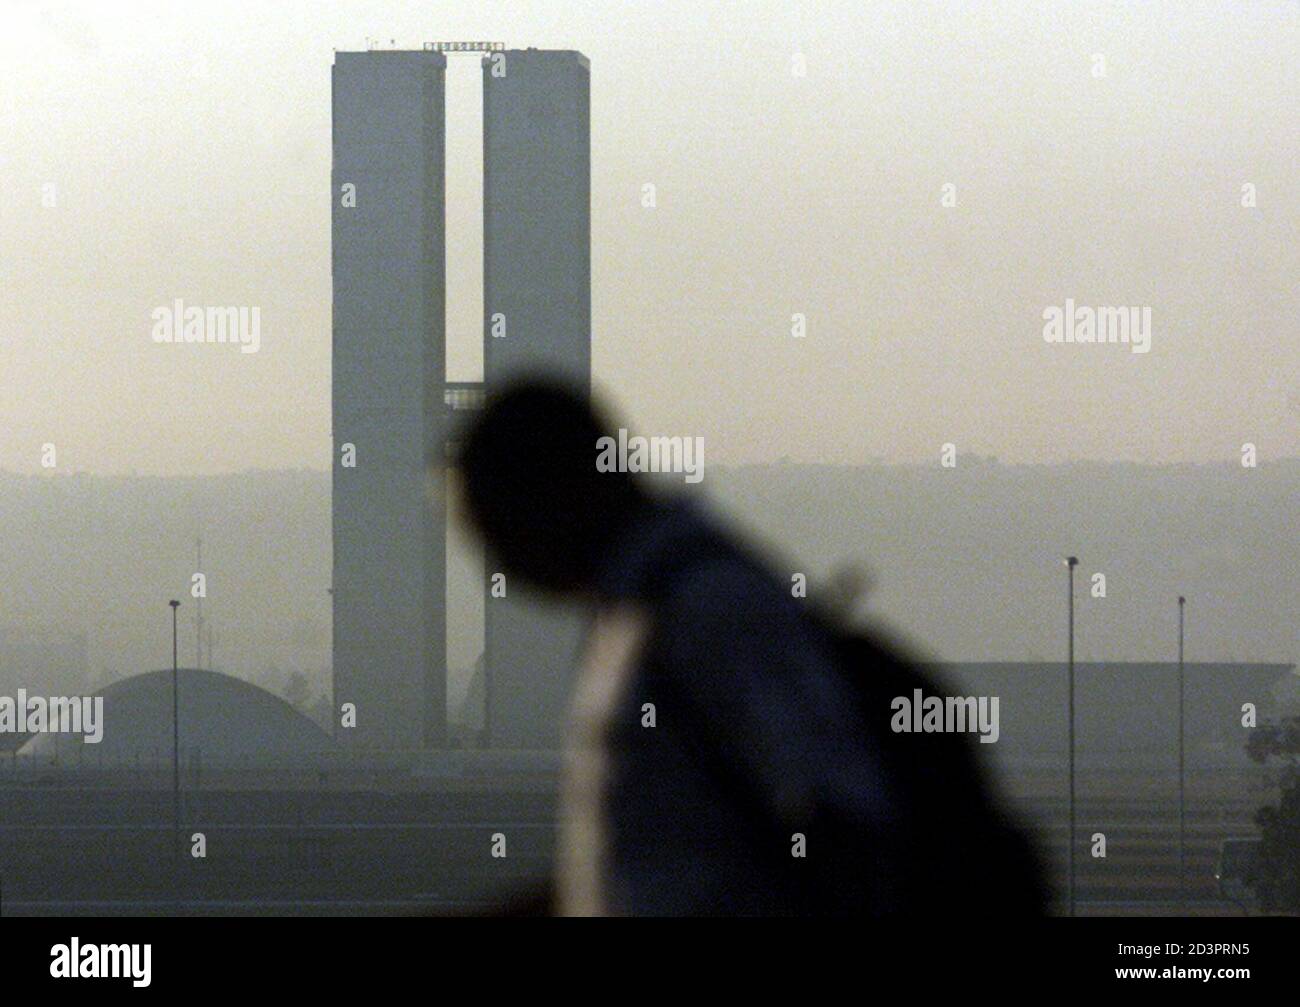 A pedestrian walks near the Congress building, enveloped in a haze, in Brasilia early June 24, 2003. The dry season, which runs from April through September in Brazil's central west region, has brought extremely low humidity levels of between 15 and 30 percent. Wildfires are common throughout the region, a savannah-like area with vegetation composed of open pasture and sparce trees, during the period. REUTERS/Jamil Bittar  JB/GN Stock Photo